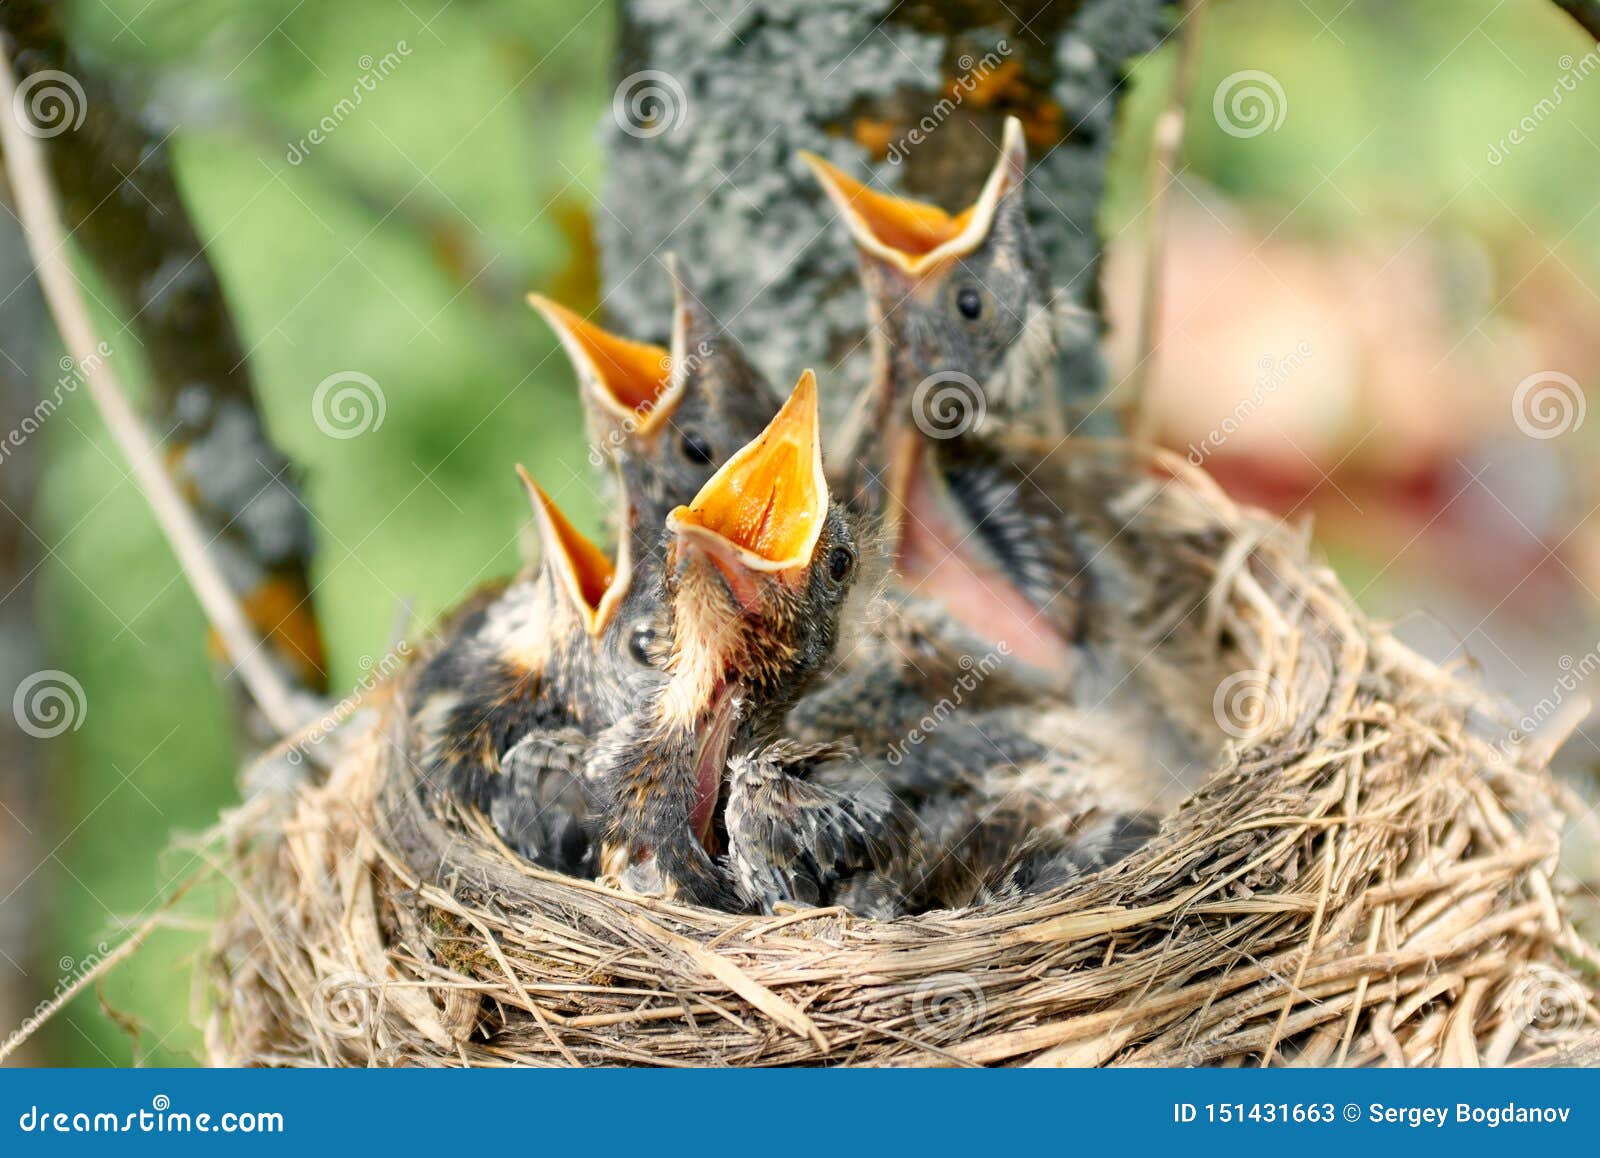 Baby birds in nest stock image. Image of outdoor, mouth - 151431663